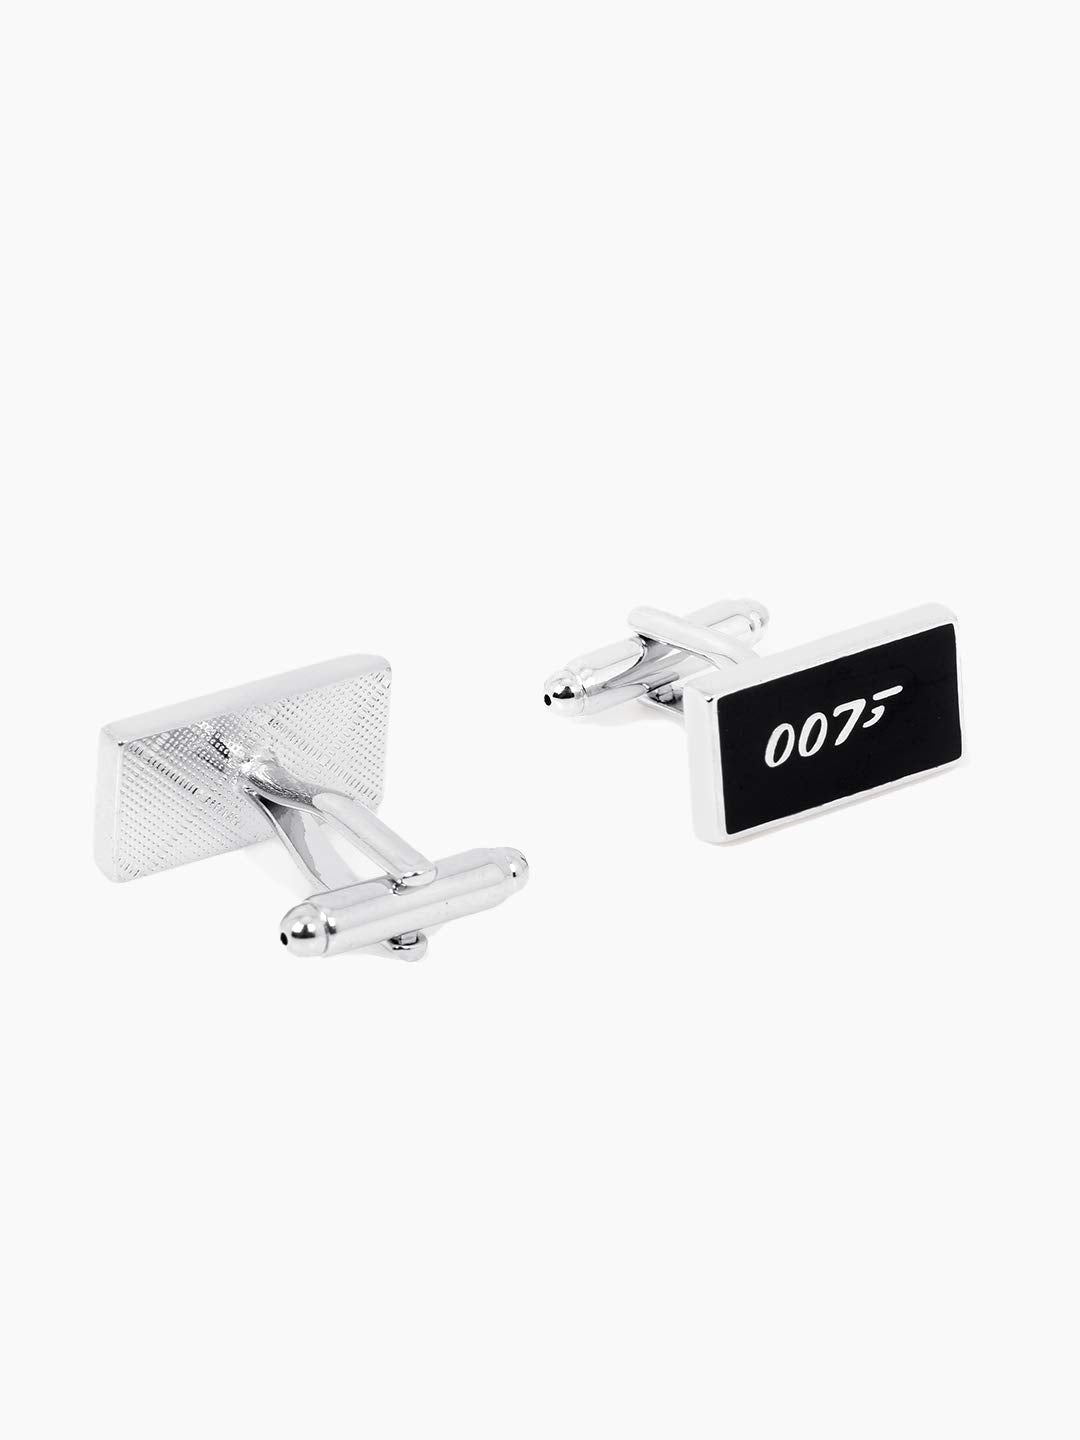 Yellow Chimes Exclusive Collection 007 James Bond Black Stainless Steel Cufflinks for Men